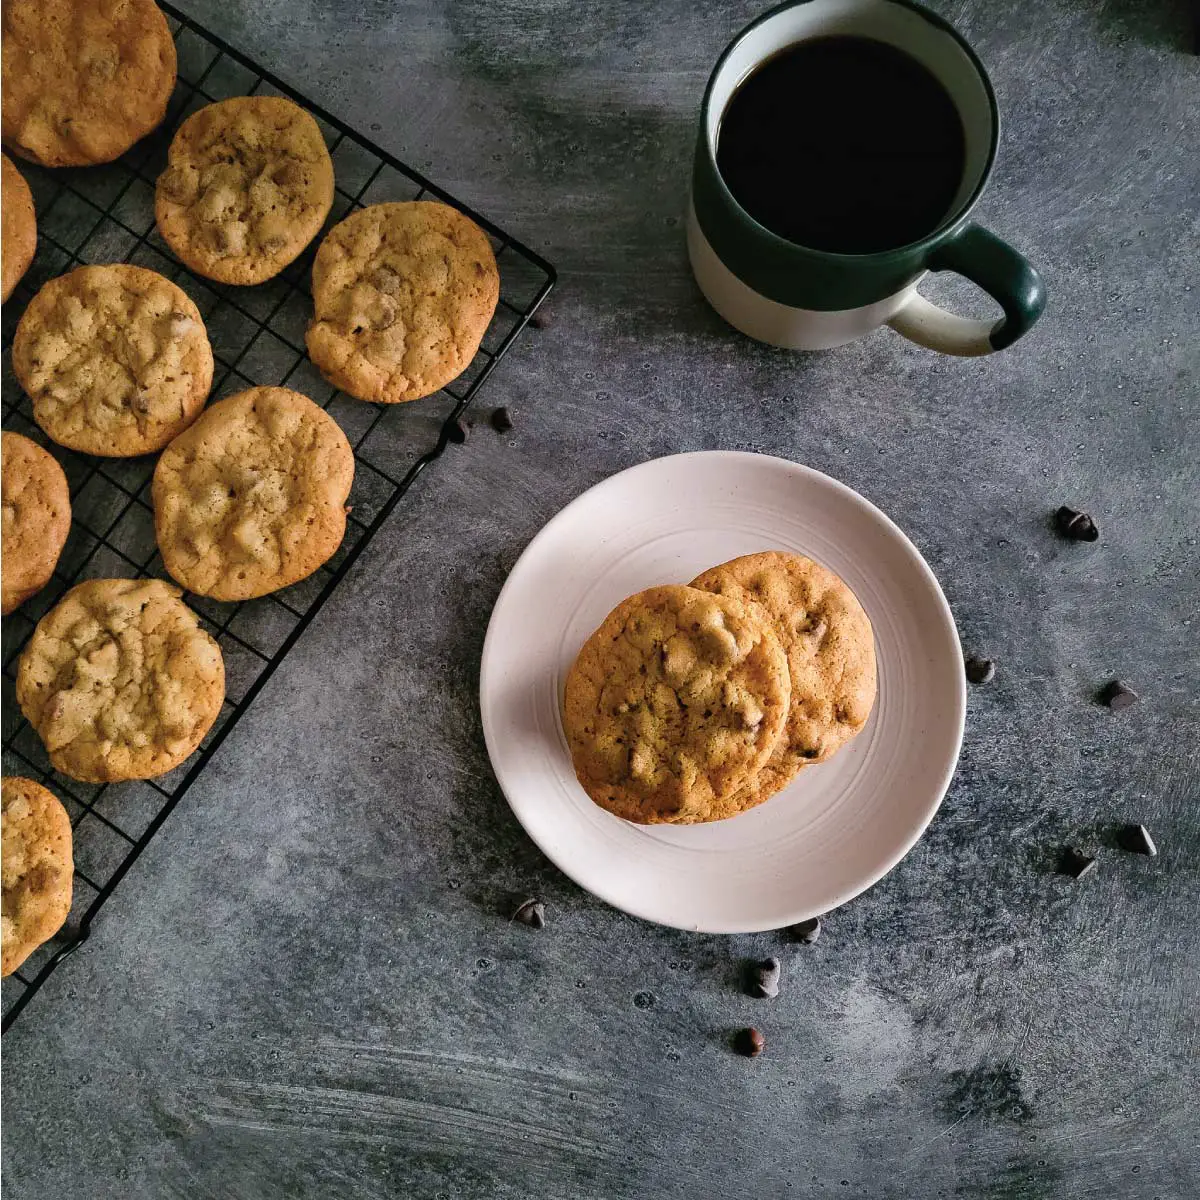 Cookies on a small plate and some on a cooling rack with a cup of coffee by the cookies.